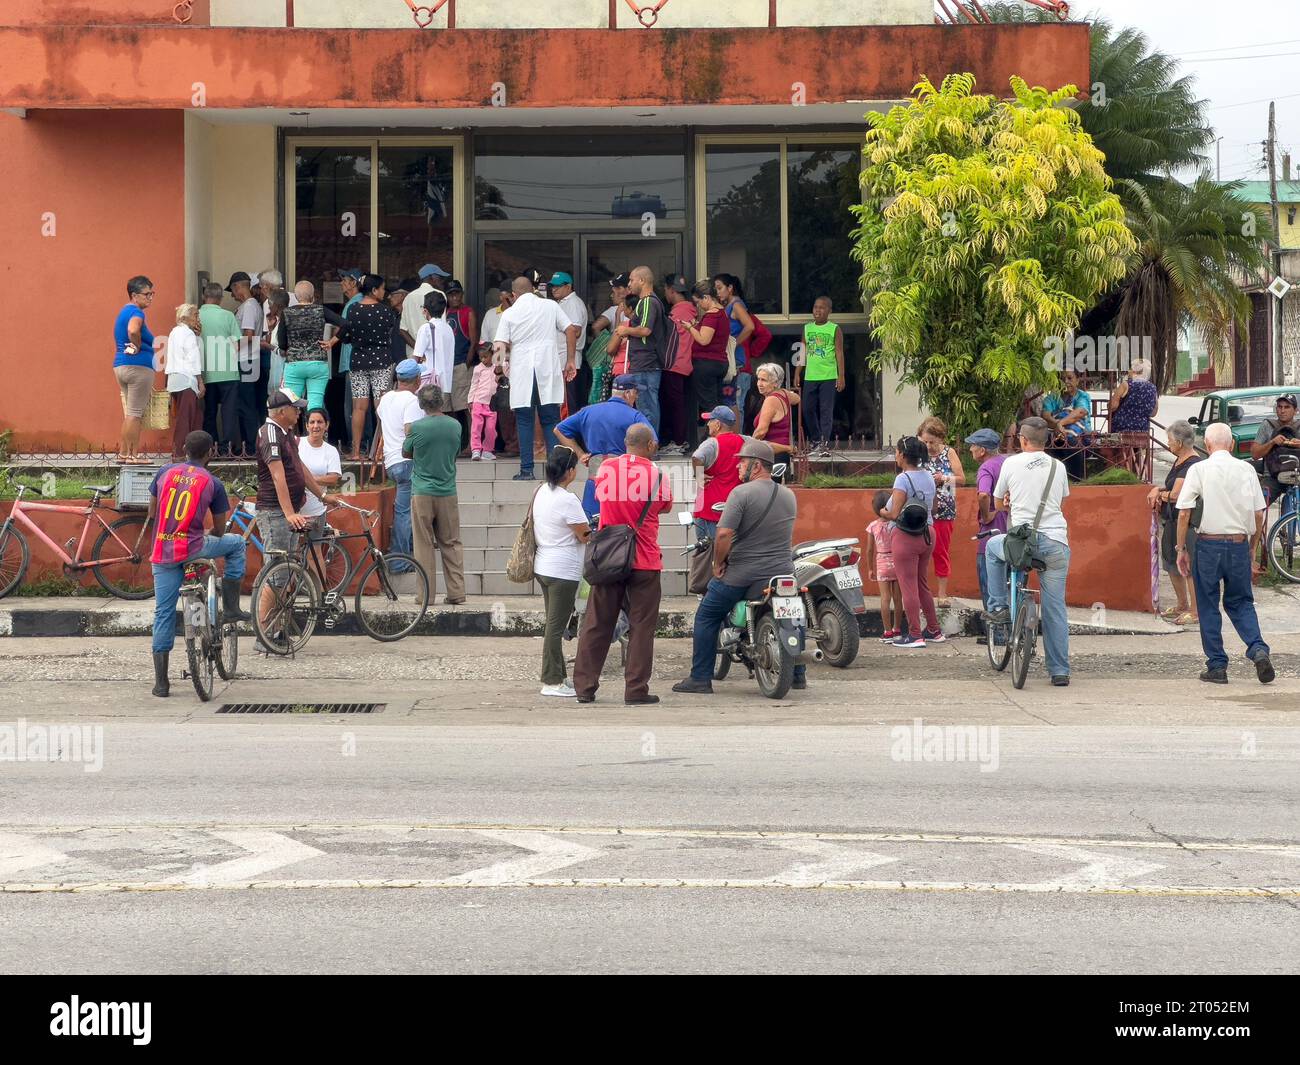 Crowd of people in the exterior of a bank branch. Some are waiting for services, others line-up to get money from the ATM machine.Santa Clara, Cuba, 2 Stock Photo